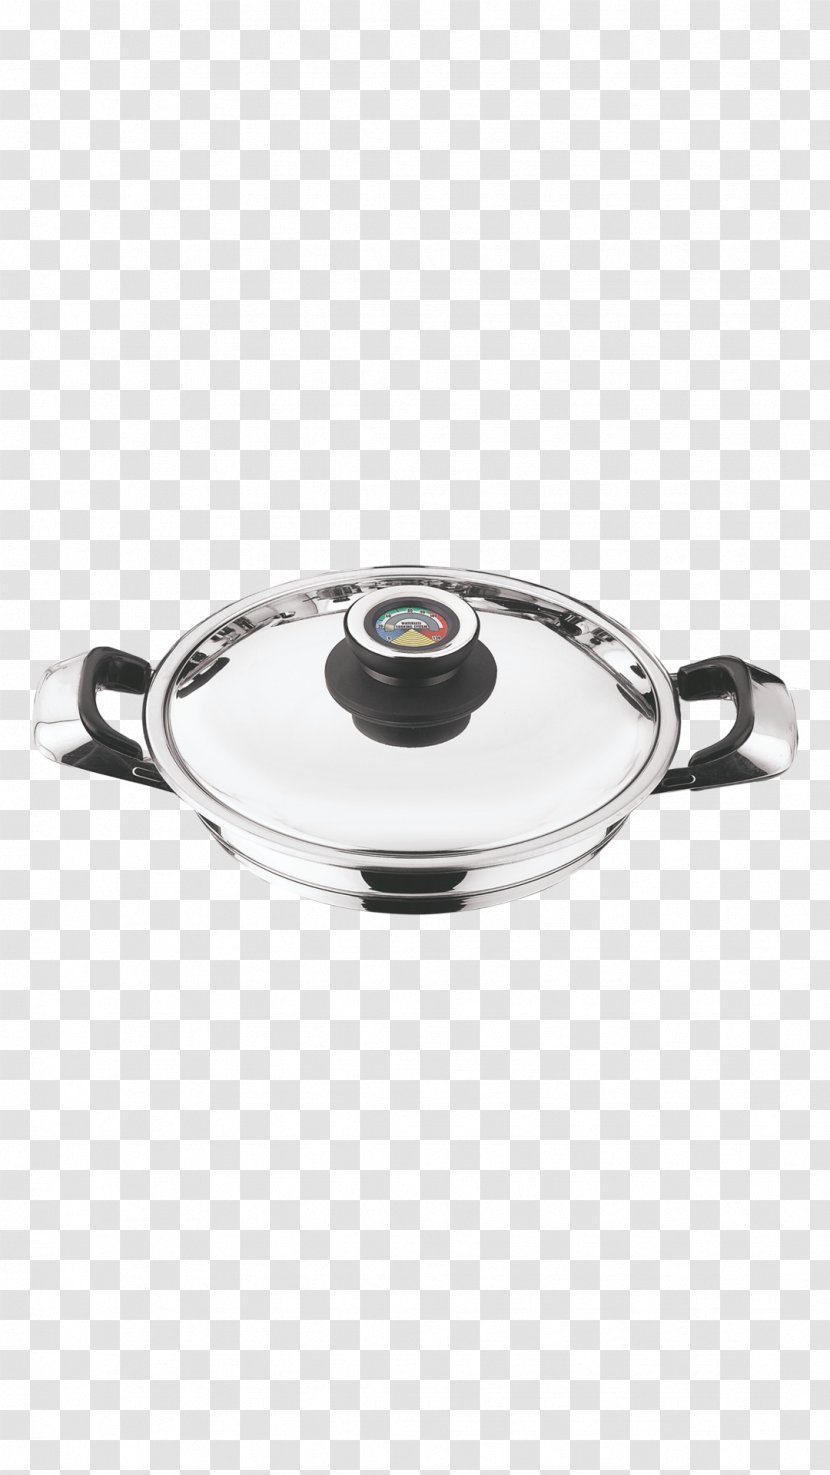 Frying Pan Tableware Silver Lid - Cookware And Bakeware Transparent PNG